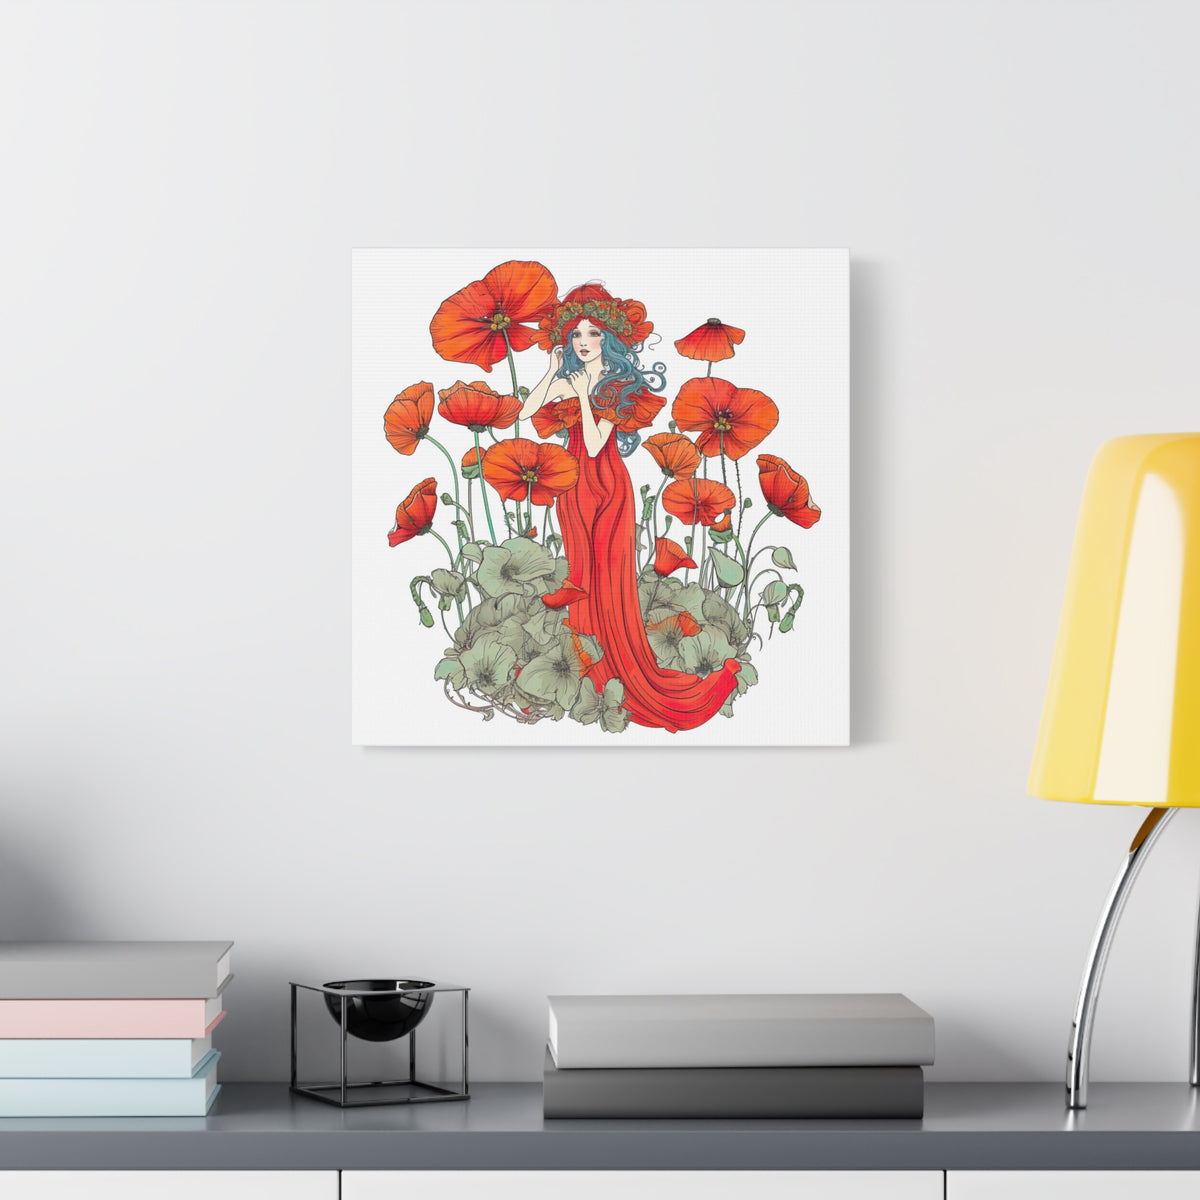 Poppy Art Print | Floral Wall Art | Stretched Canvas Art | Boho Home Decor | Poppies Art | Matte Canvas, Stretched, 1.25"